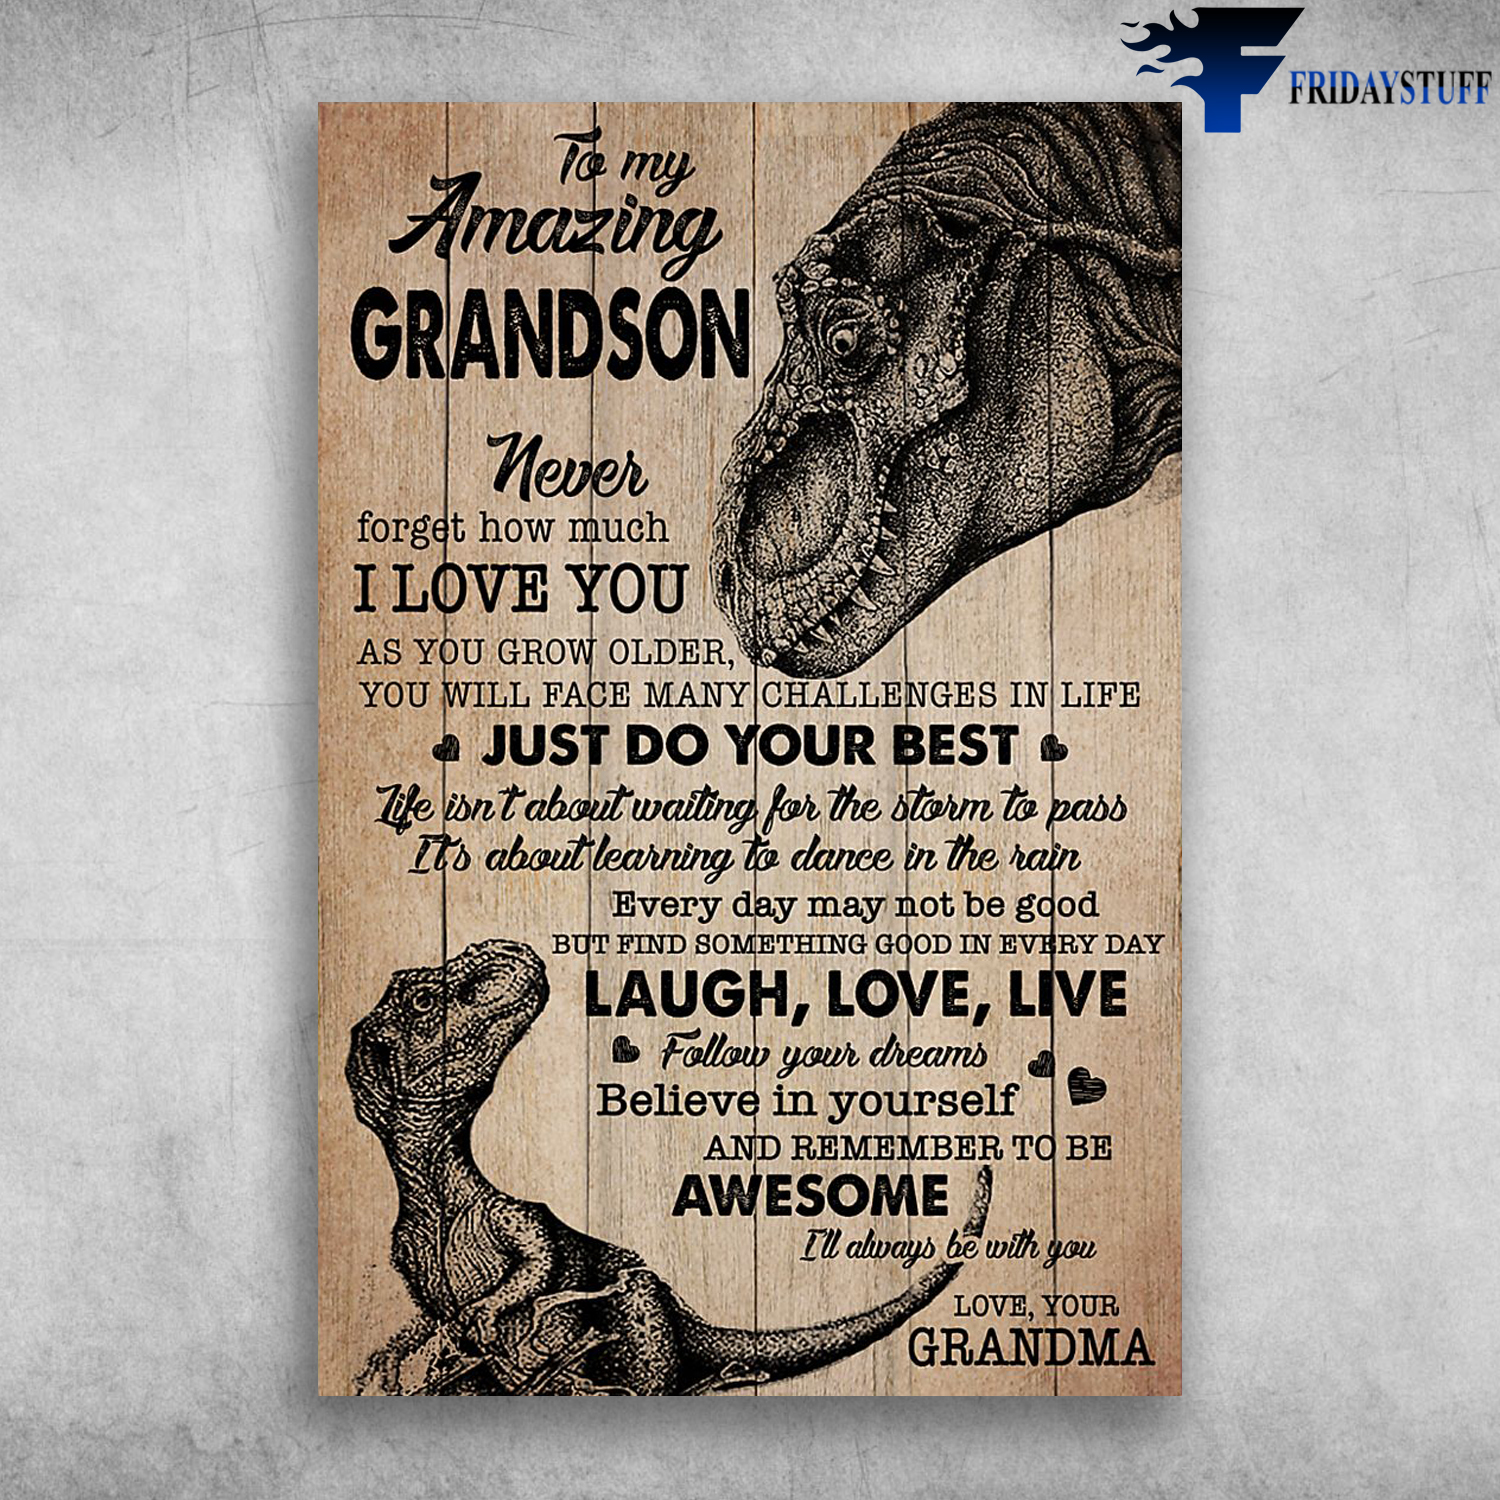 Baby And Grandma Dinosaur To My Amazing Grandson Never Forget How Much I Love You